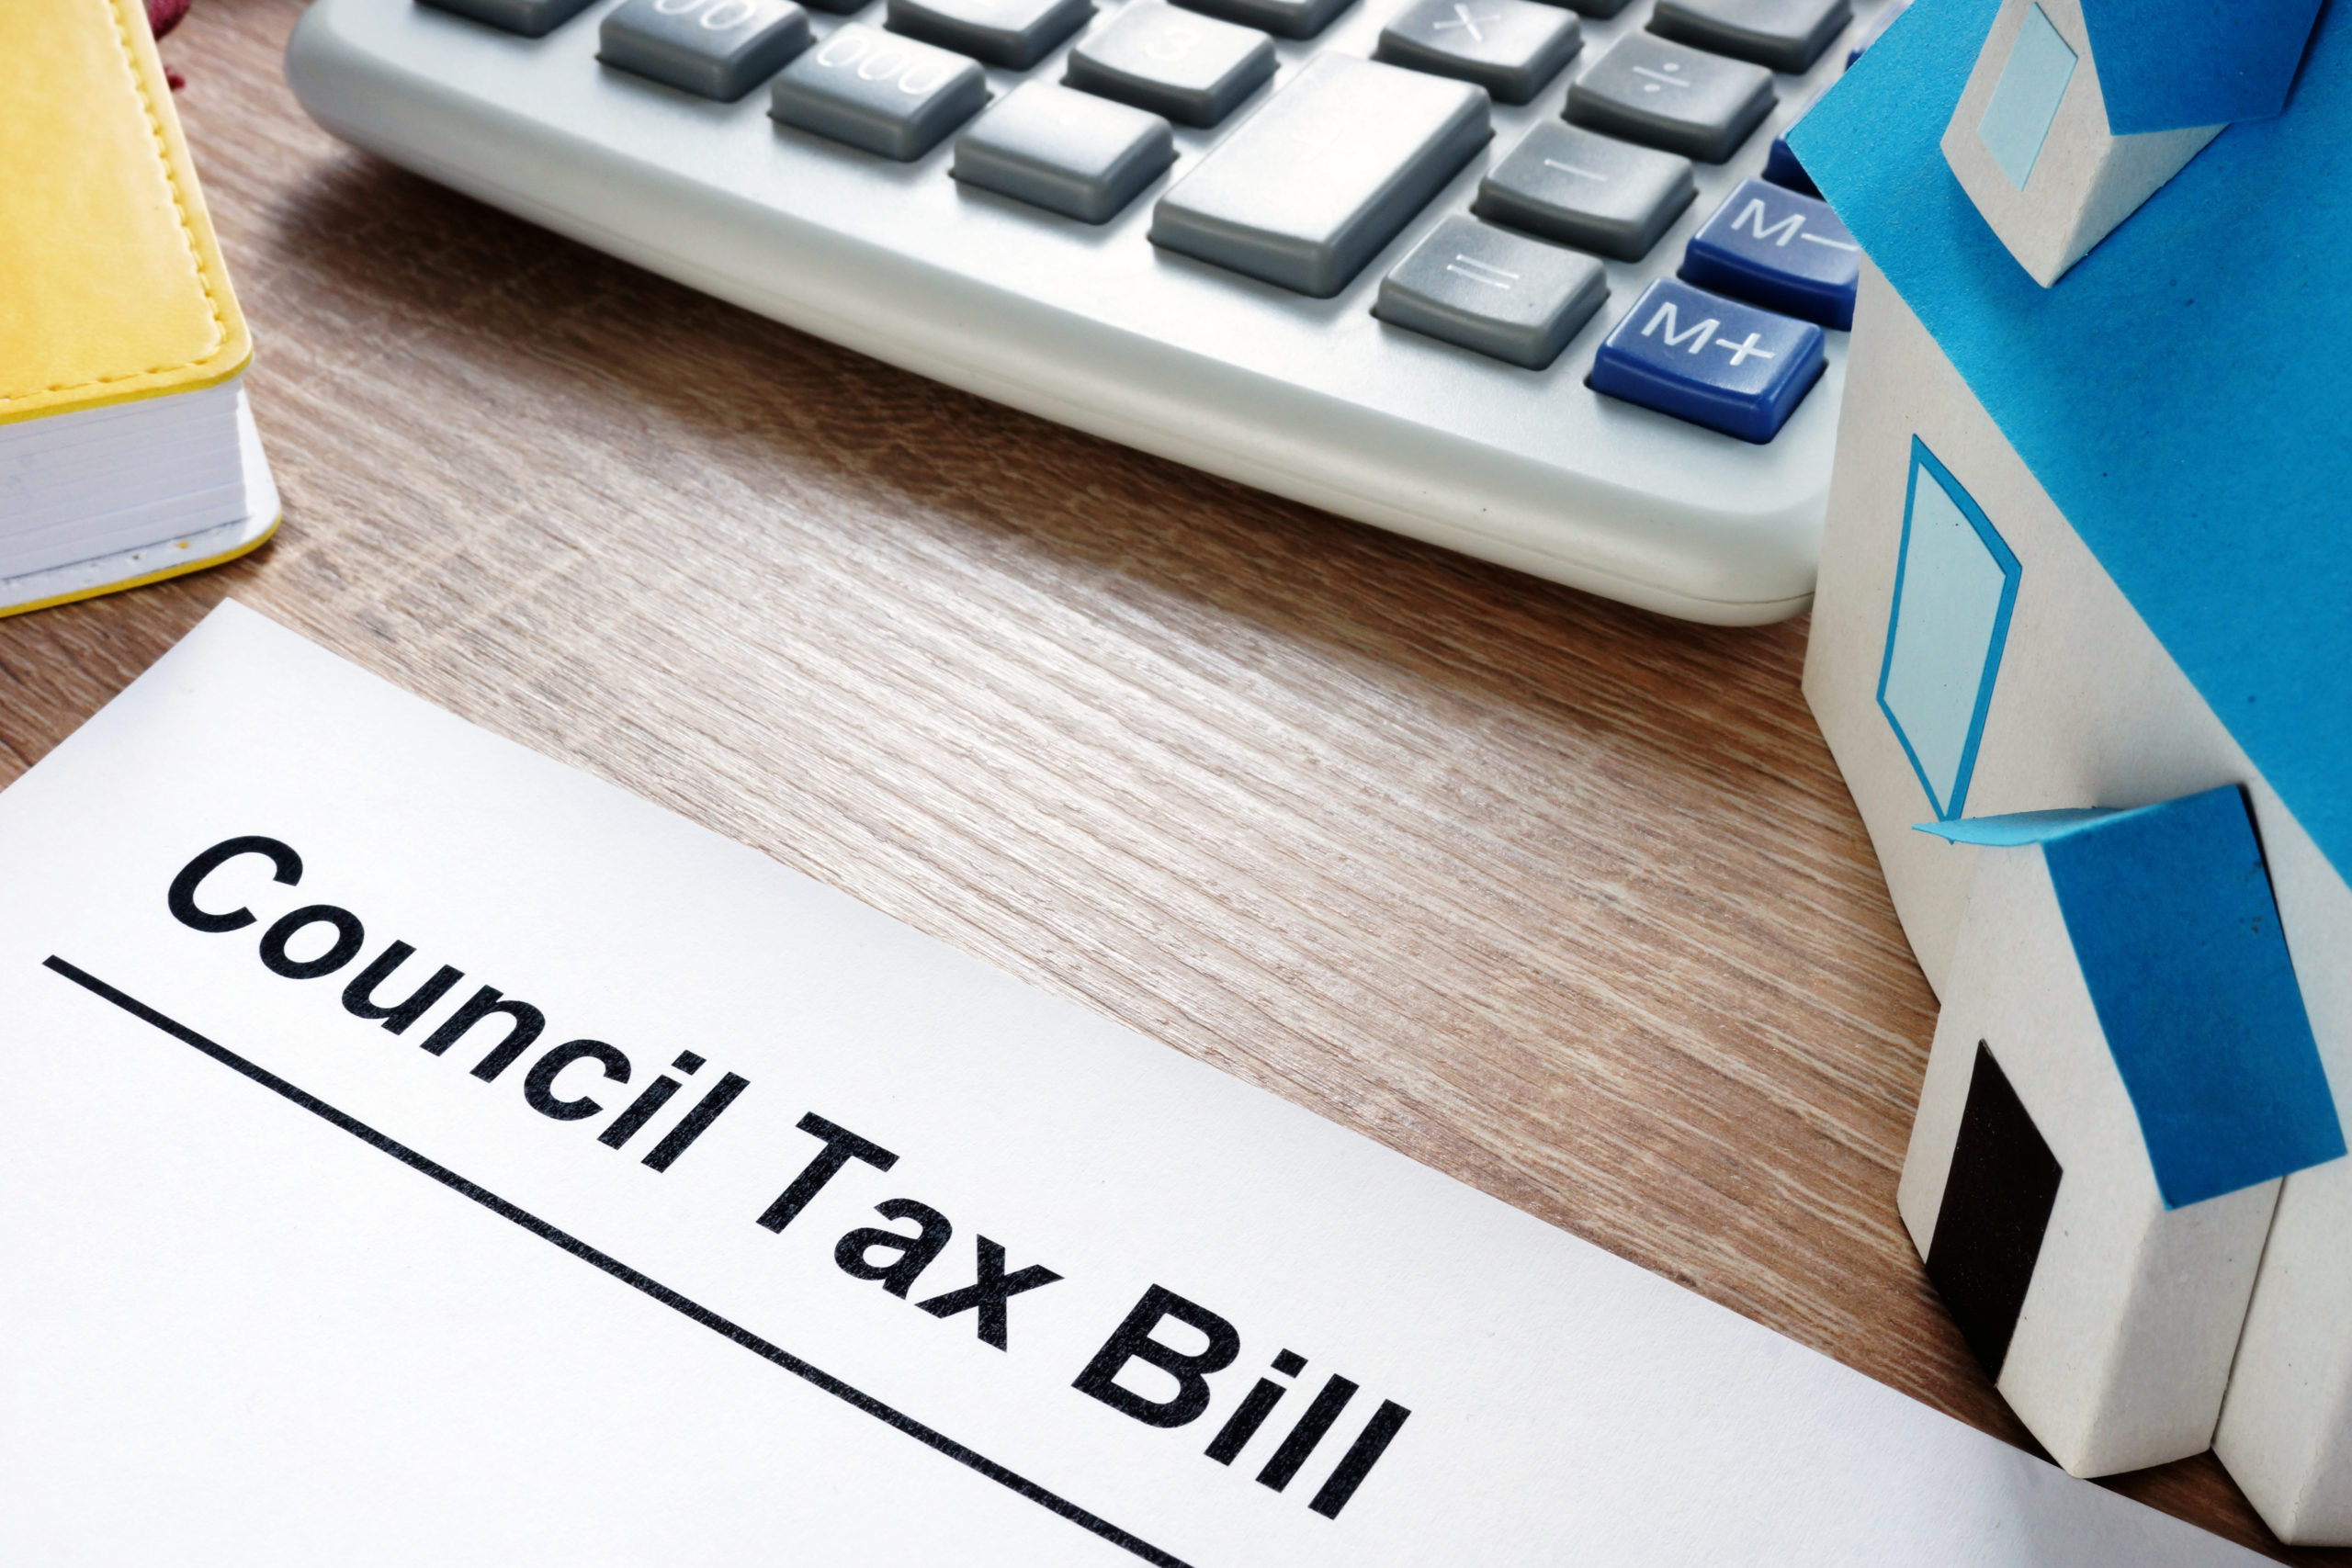 council-tax-new-student-exemption-scottish-association-of-landlords